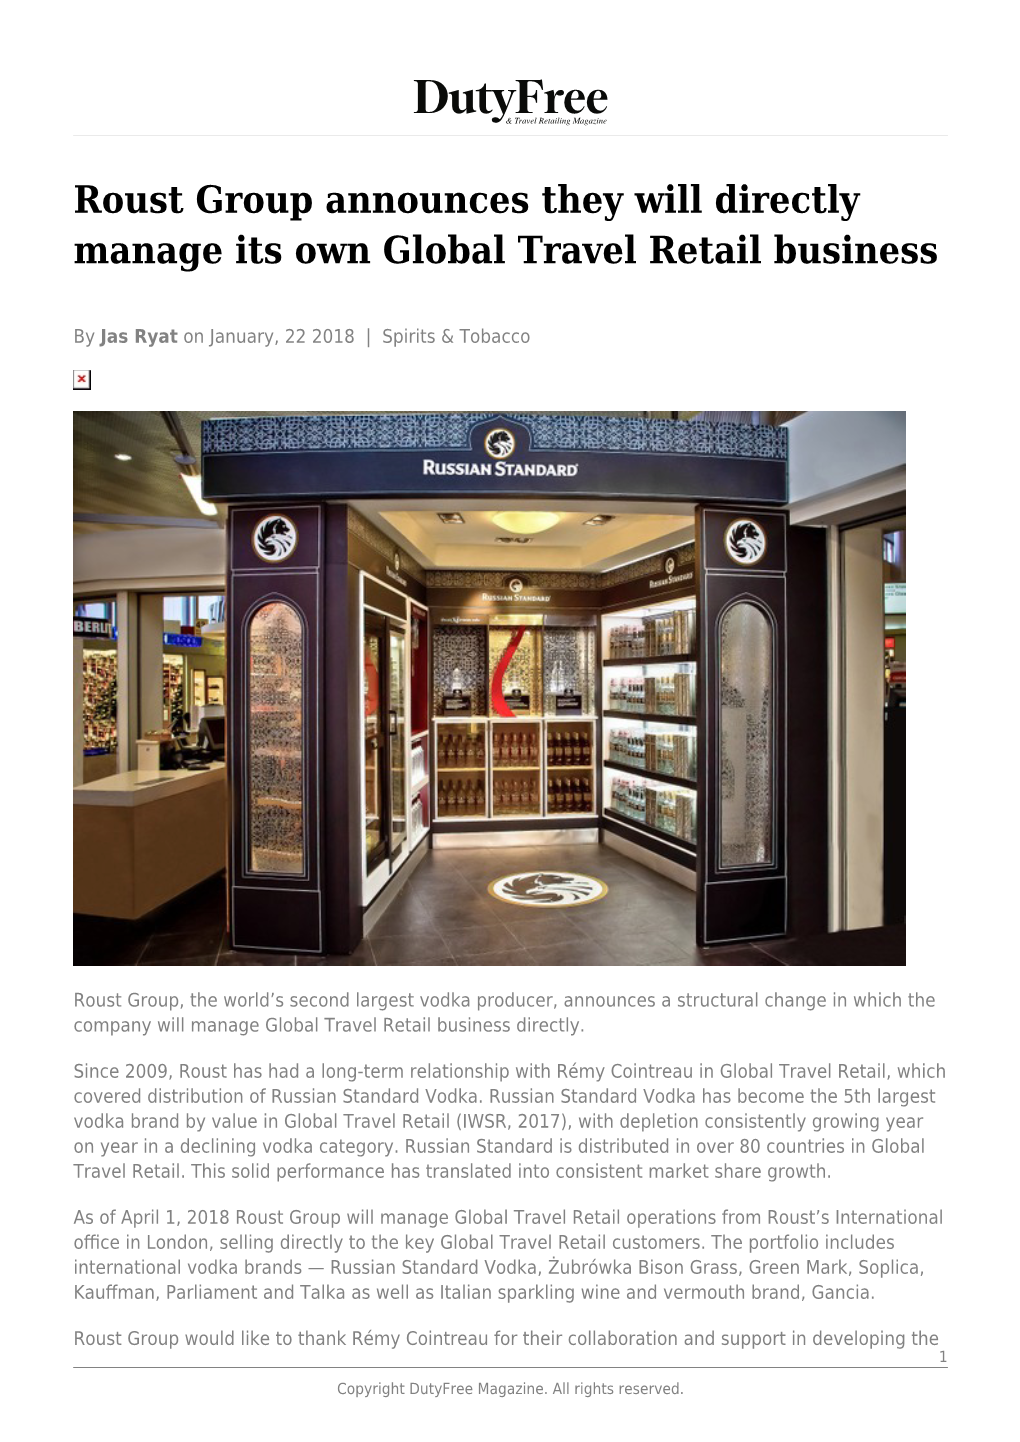 Roust Group Announces They Will Directly Manage Its Own Global Travel Retail Business